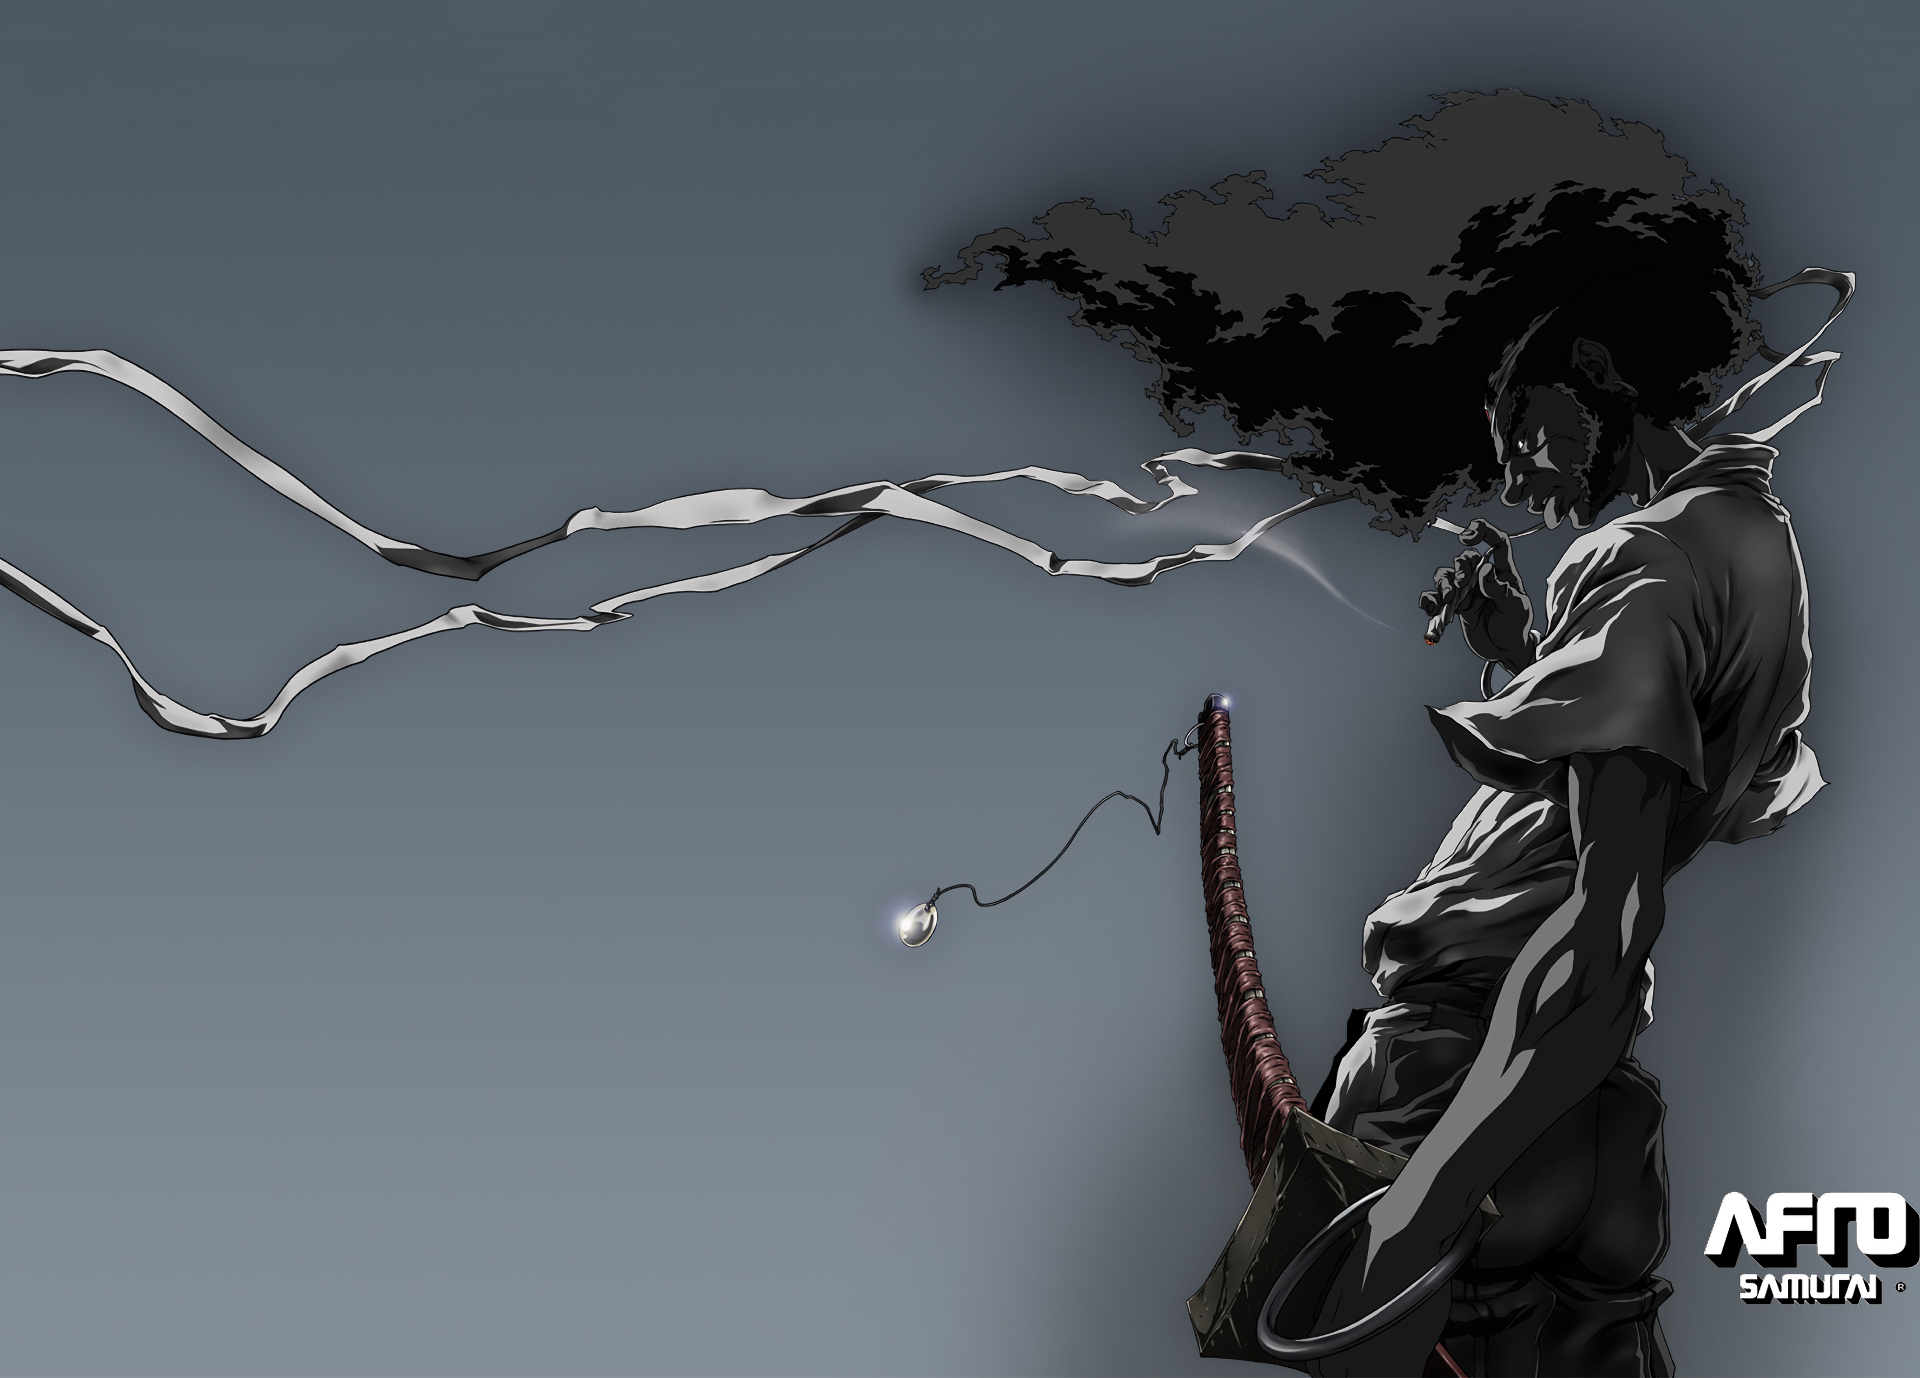 40 Anime Afro Samurai HD Wallpapers and Backgrounds